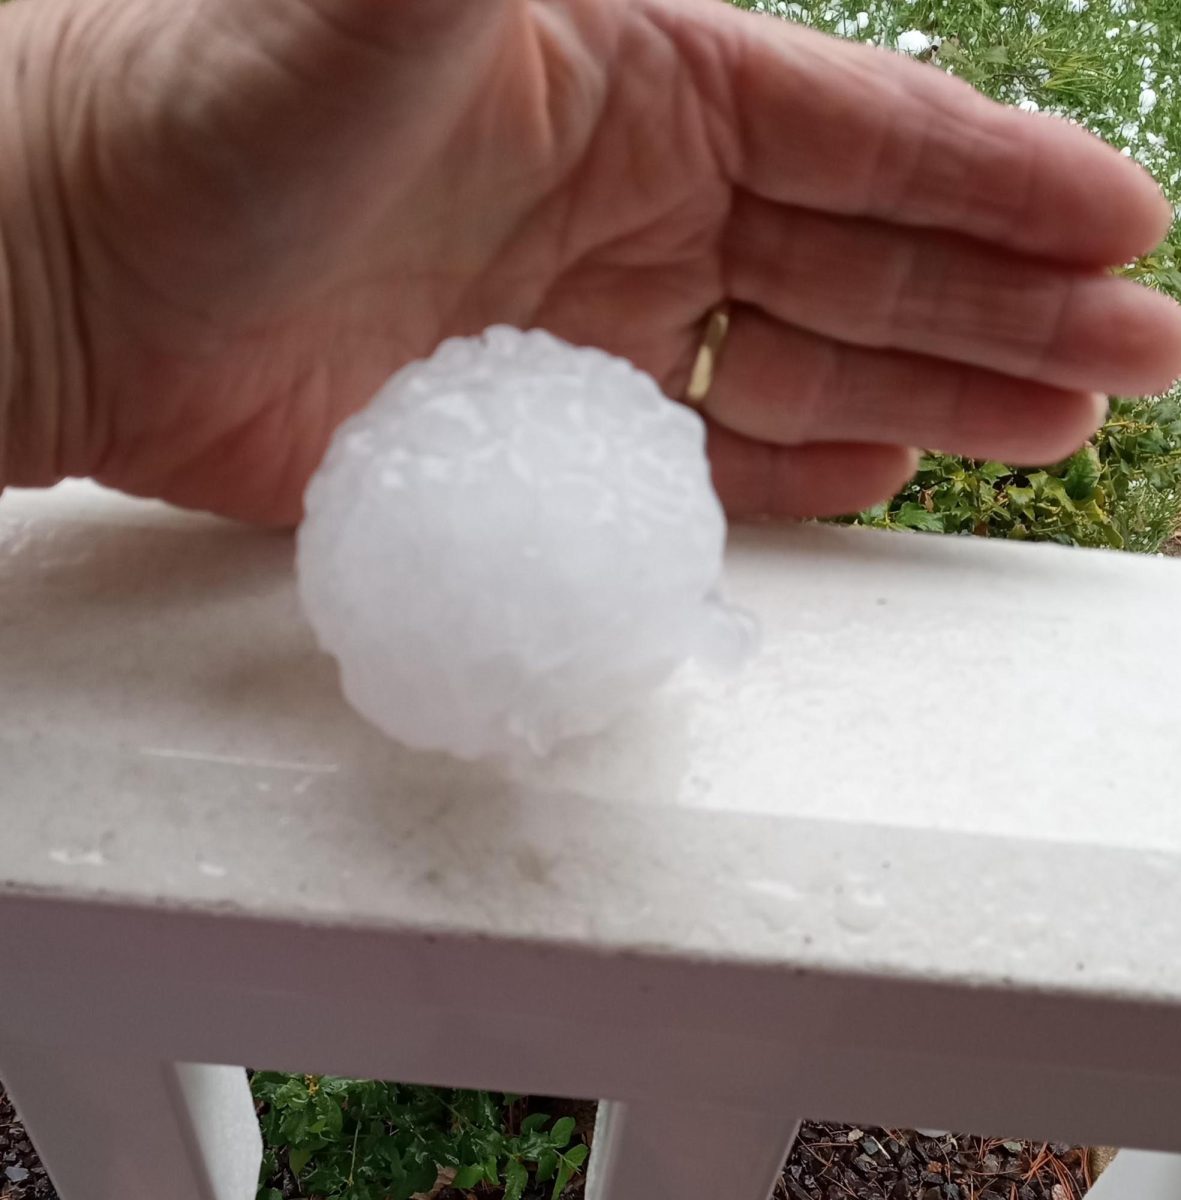 Raymond+Hanff+shows+the+size+of+the+hail+that+struck+his+home+and+was+littered+in+his+yard.+O%E2%80%99Fallon+was+subject+to+baseball+size+hail+on+Thursday+night.